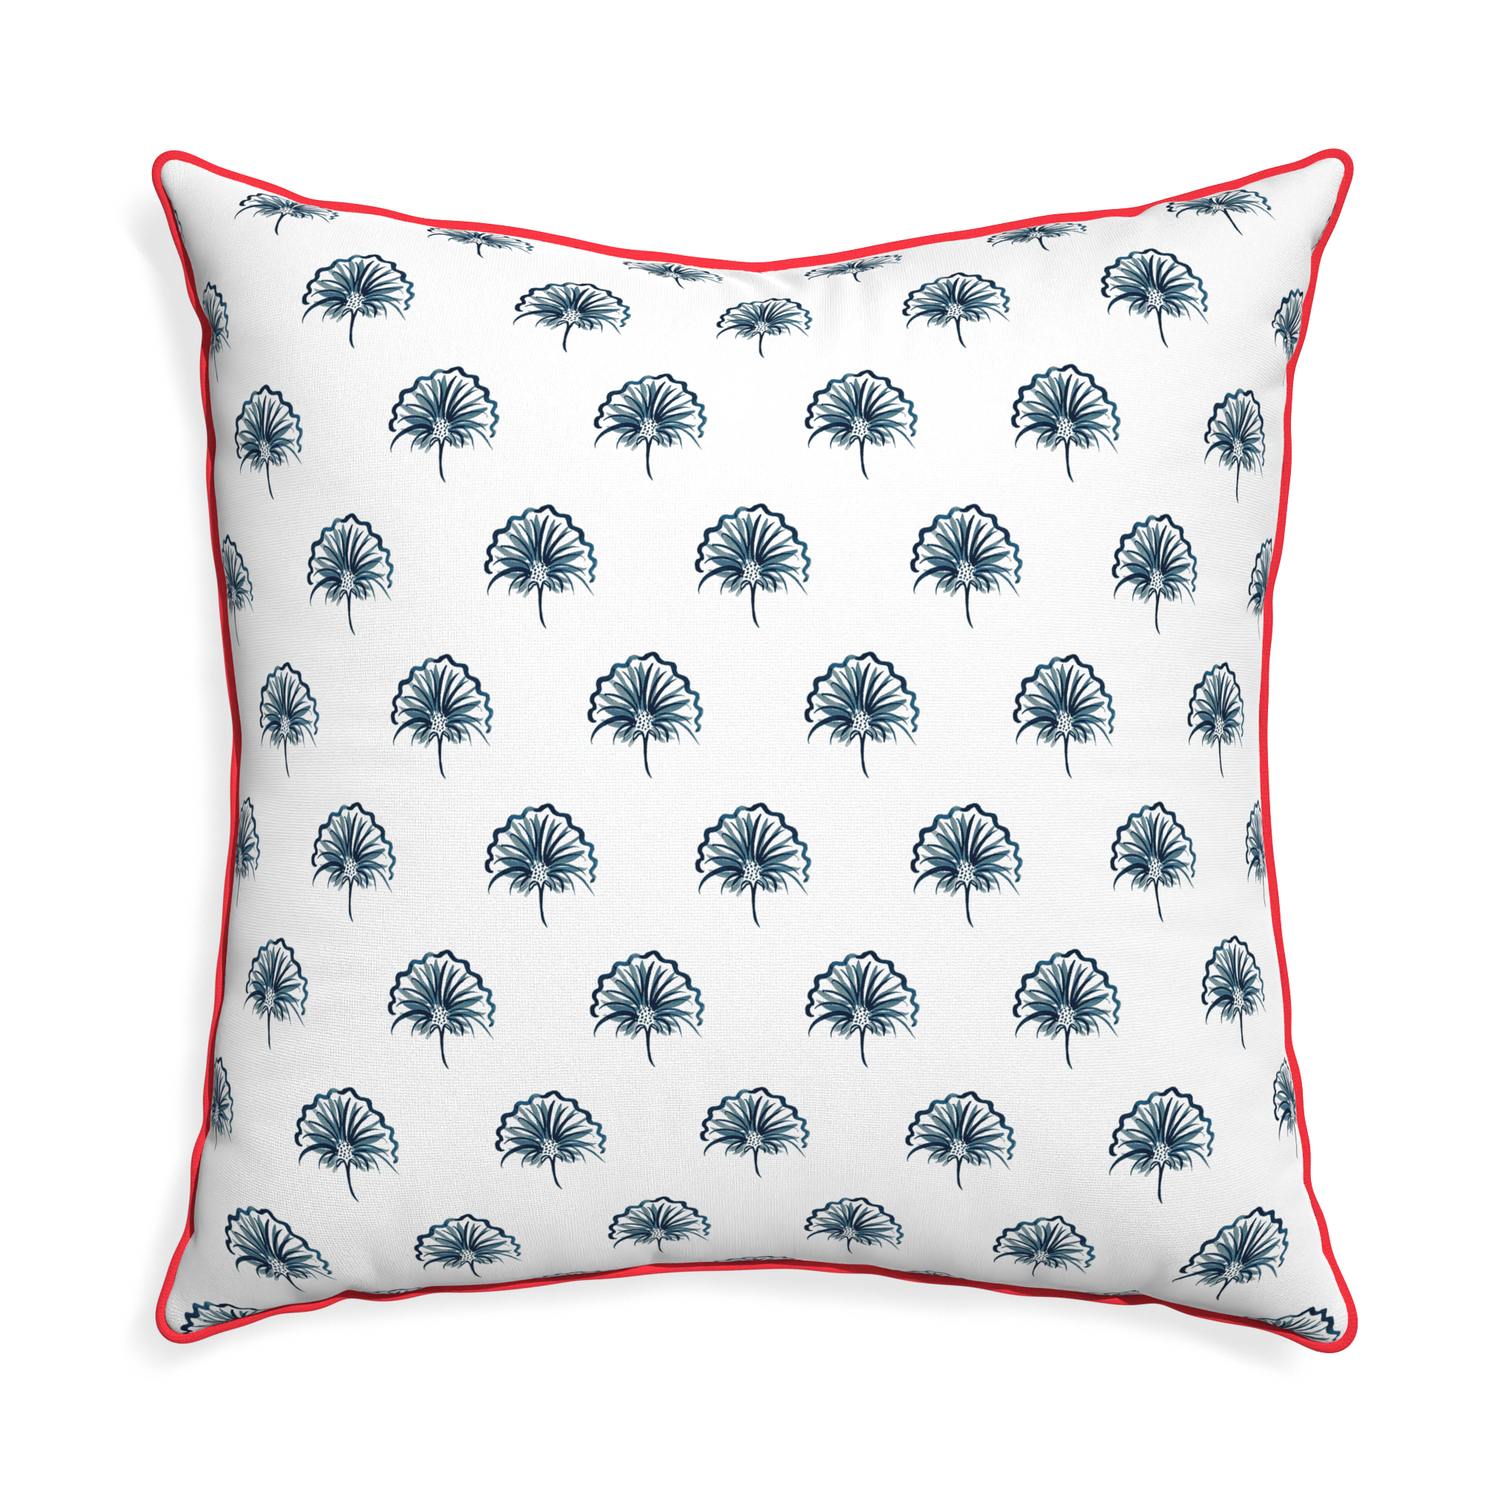 Euro-sham penelope midnight custom pillow with cherry piping on white background